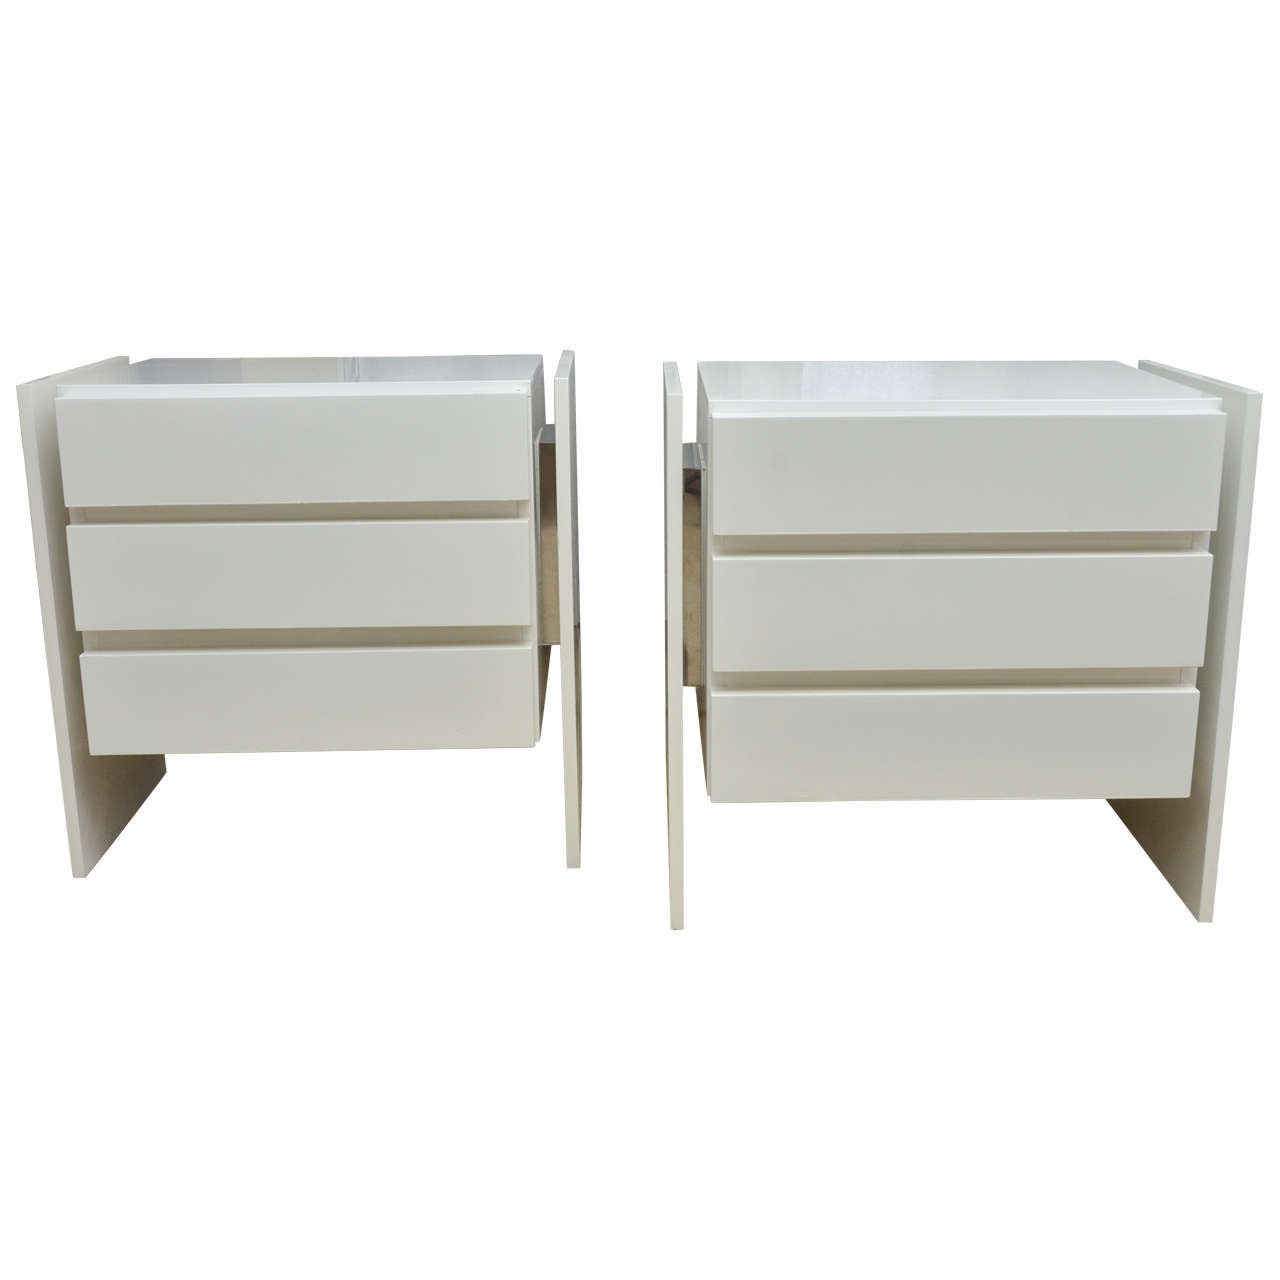 Very Chic Pair of Vintage White Lacquer Nightstands with Chrome Trim